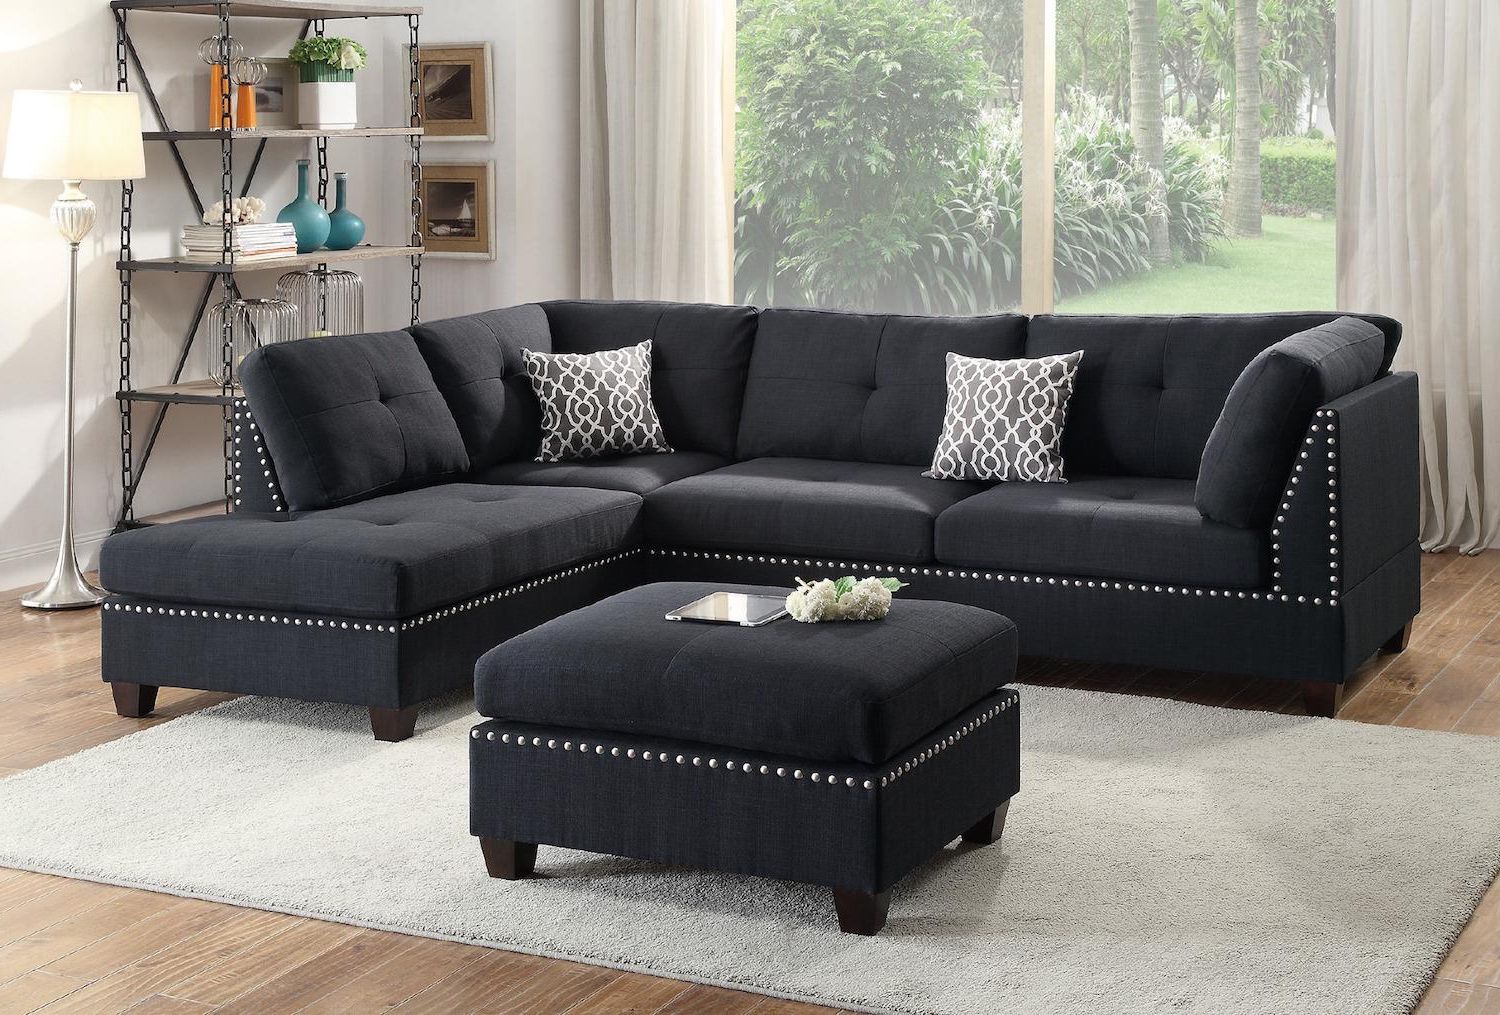 Felton Modern Style Pullout Sleeper Sofas Black With Famous Reversible Sectional Sofas Reversible Espresso Leather (View 6 of 20)